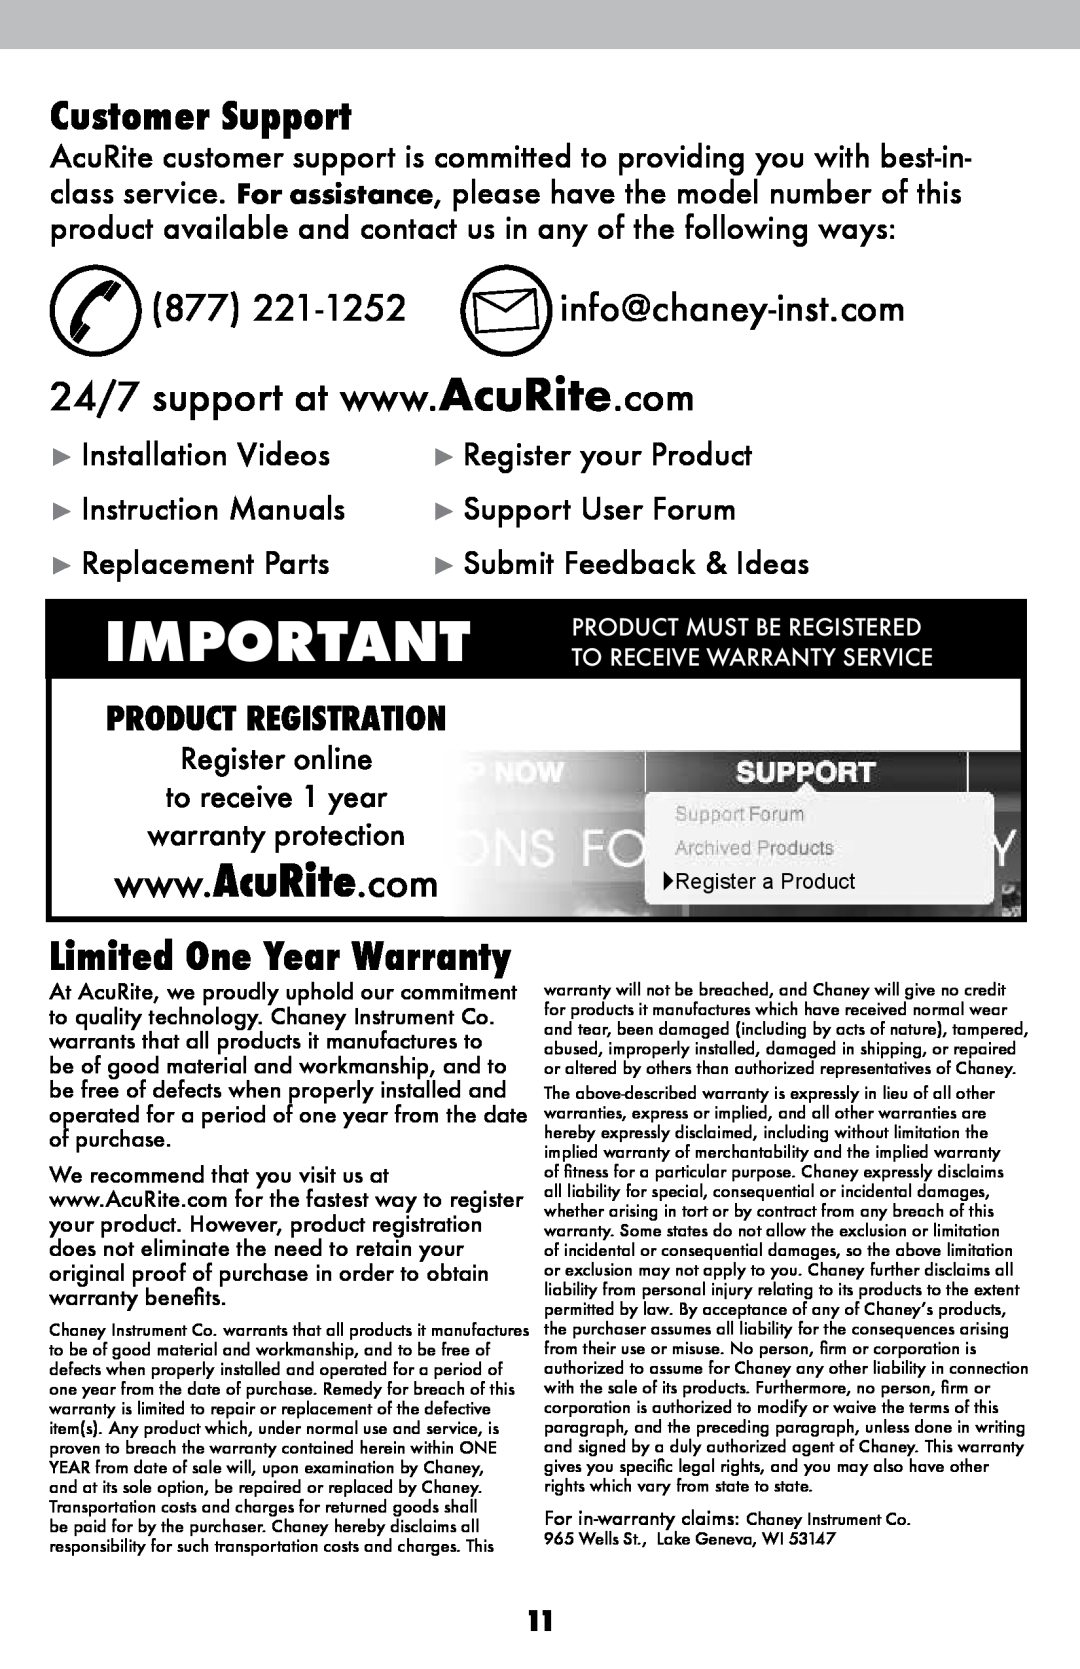 Acu-Rite 827 Customer Support, 877 221-1252 info@chaney-inst.com, Limited One Year Warranty, Installation Videos 